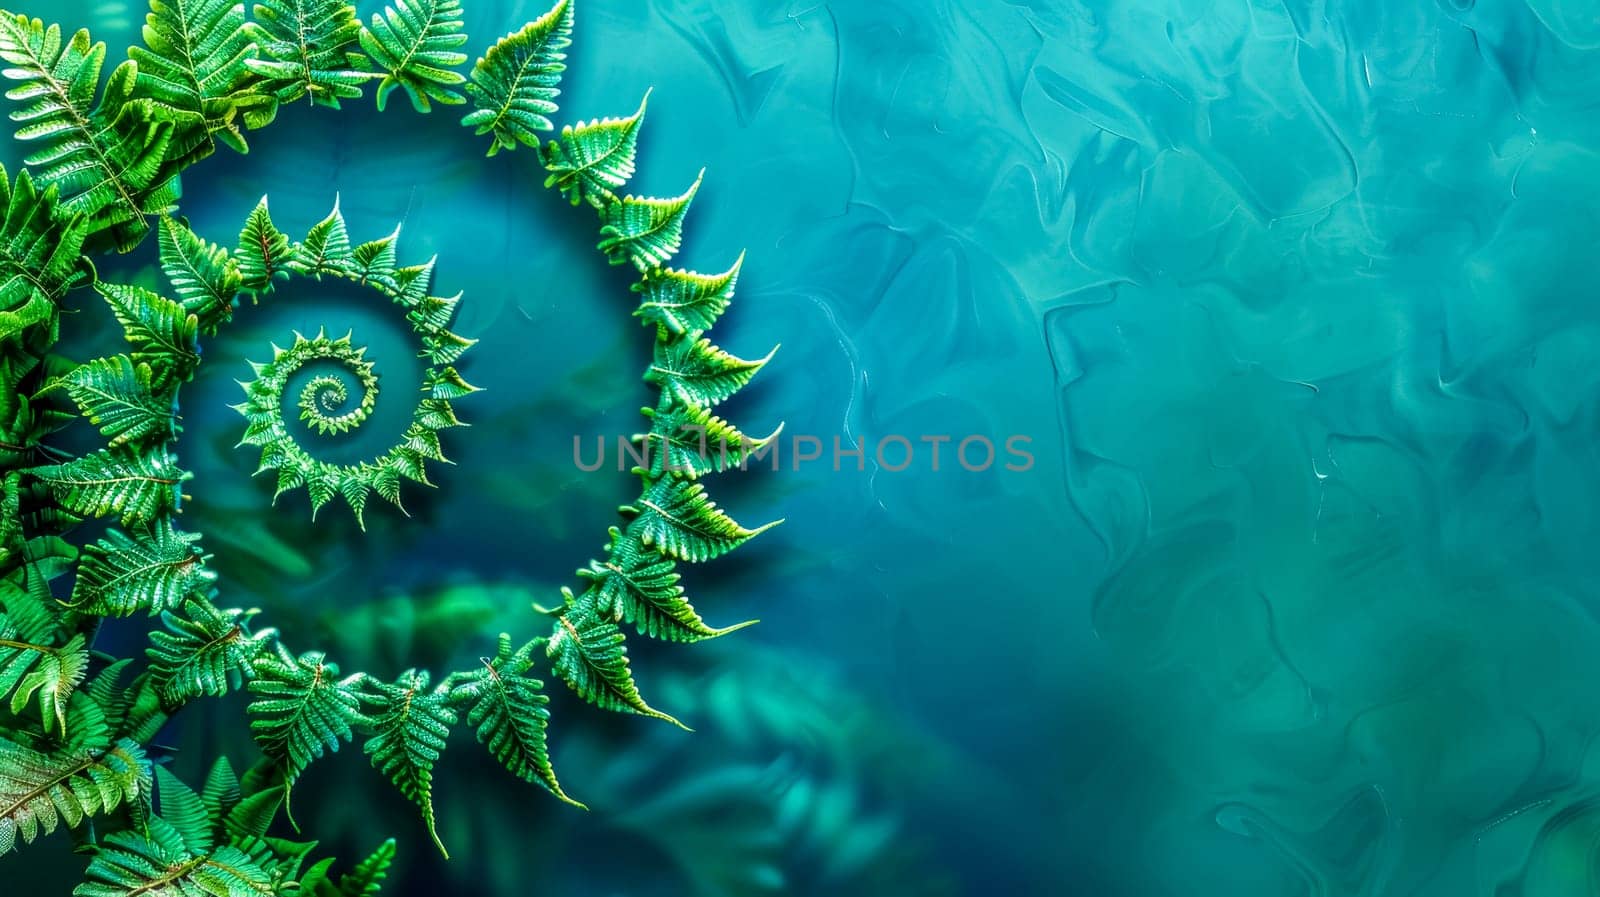 Fern spiral over abstract blue water background by Edophoto